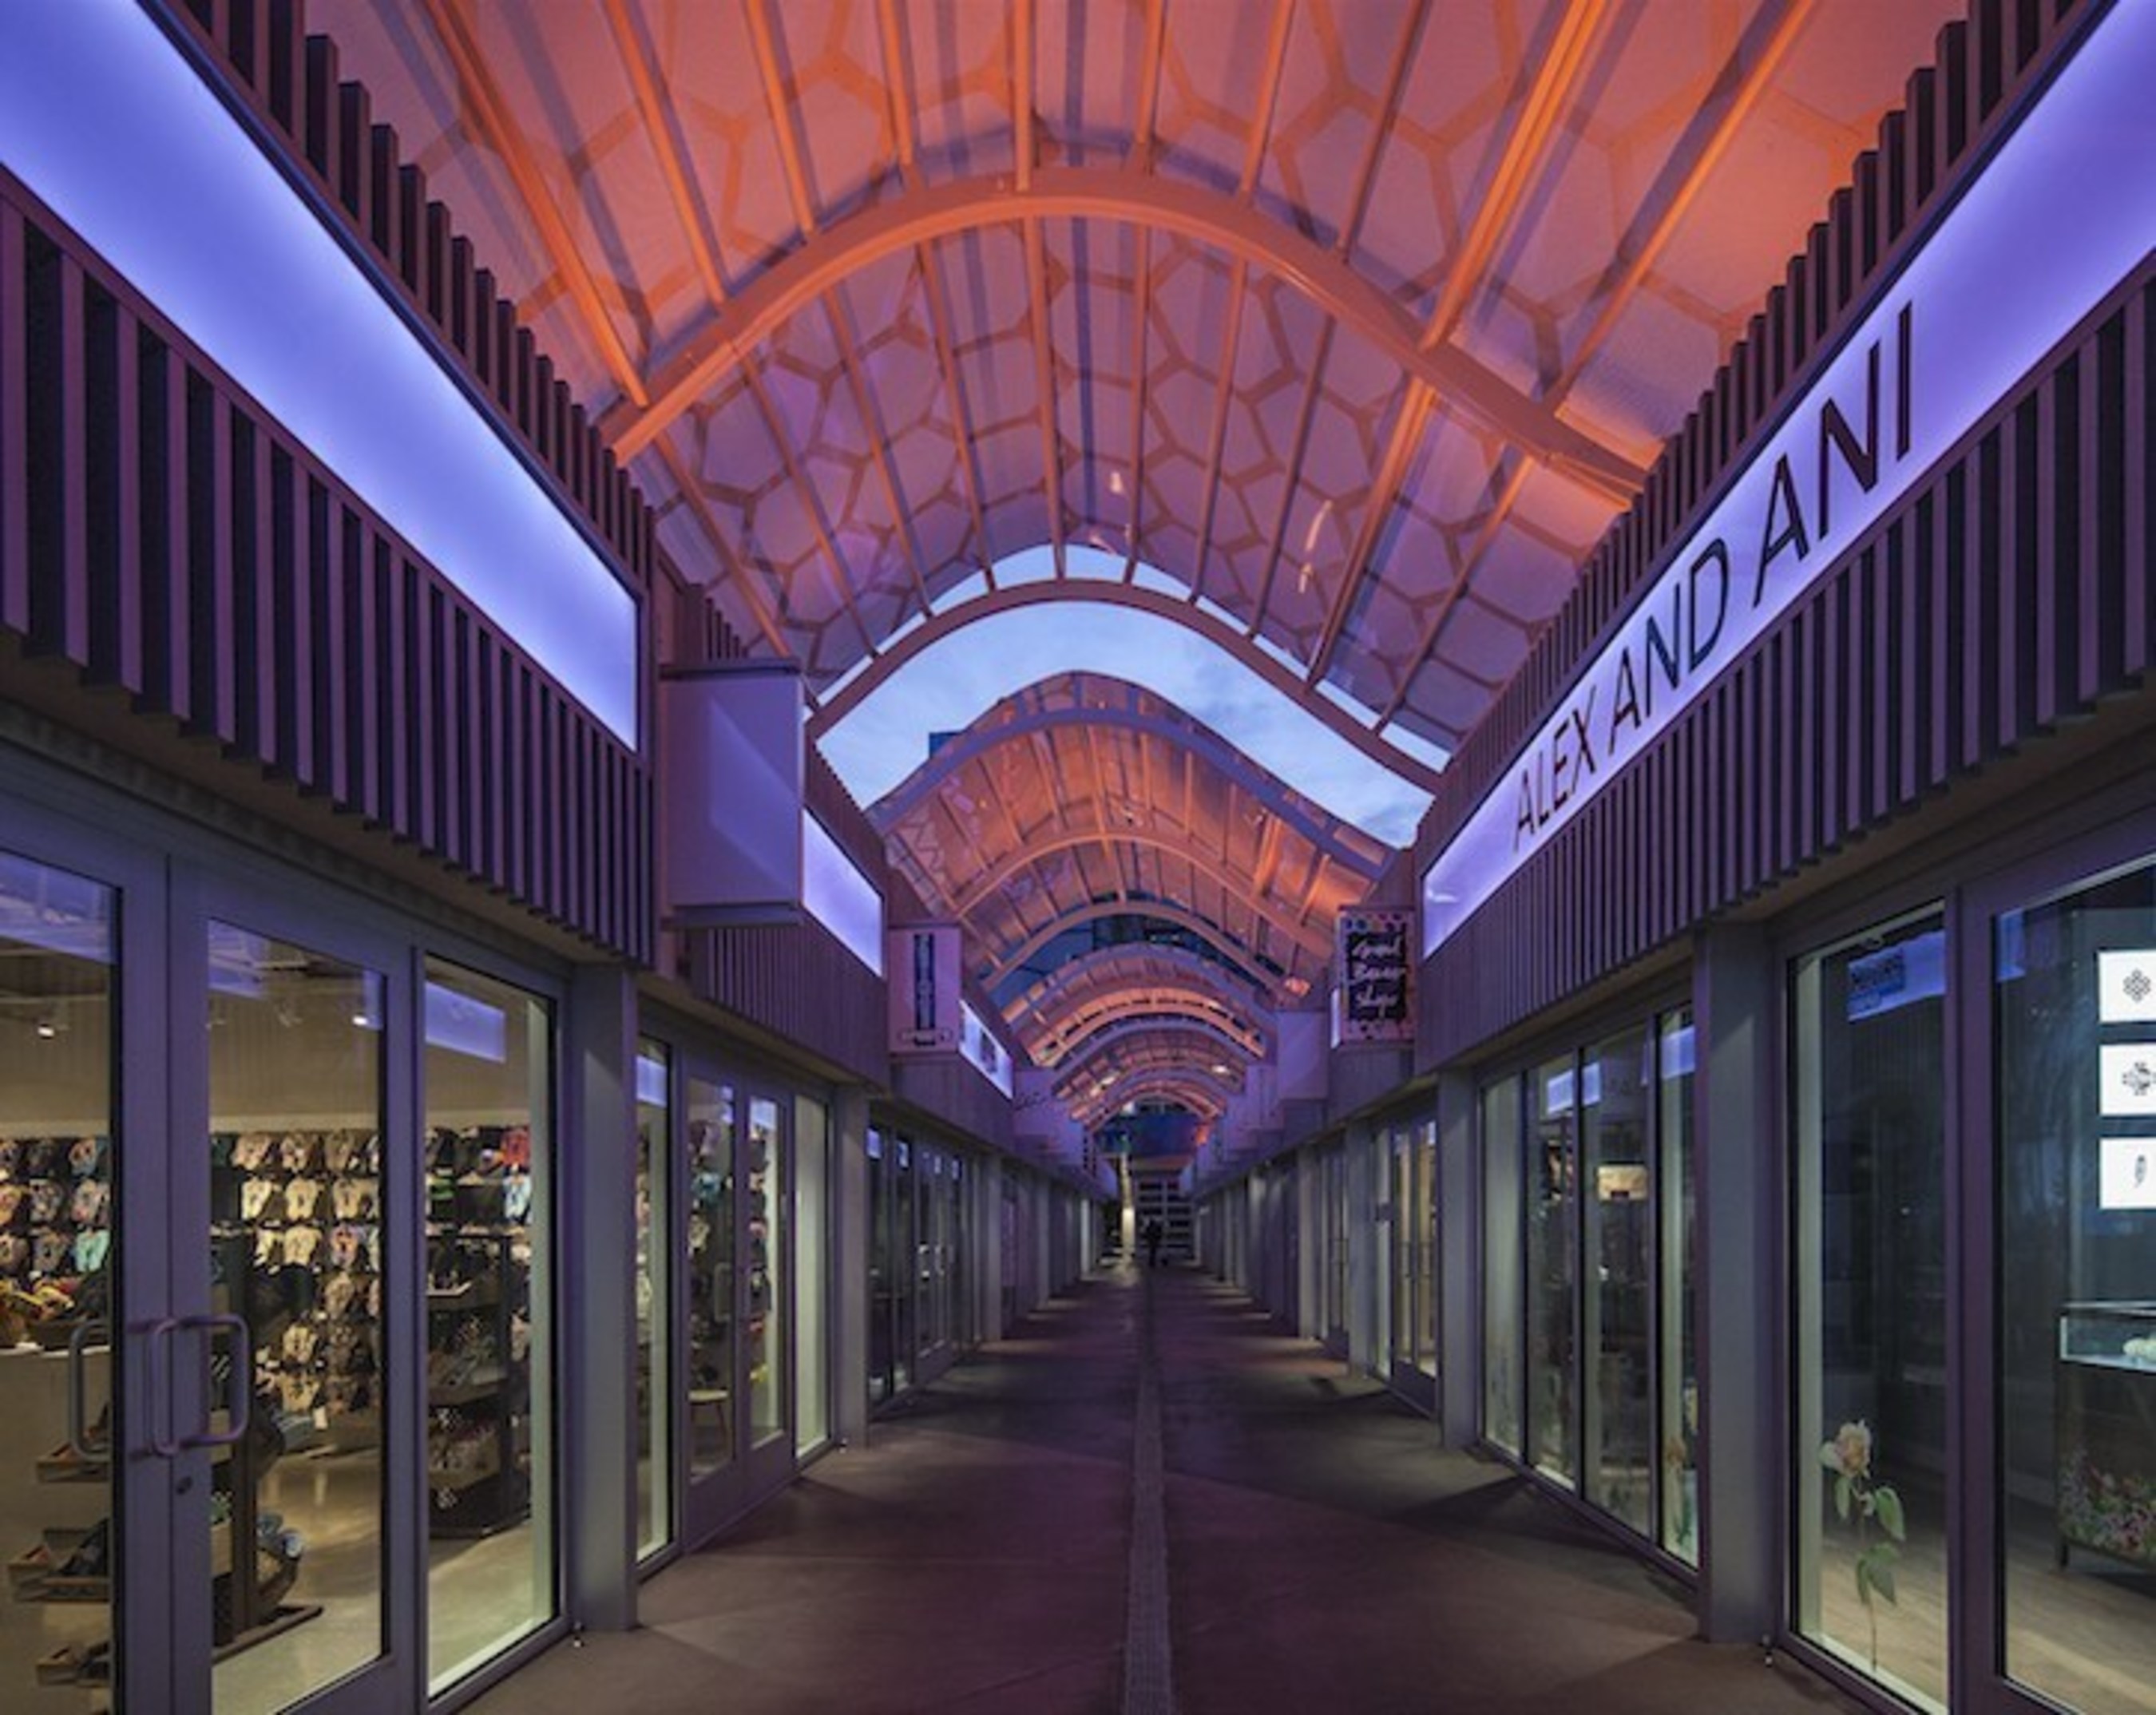 Undulating facades and canopies are skinned in multi-colored scales that deliver vibrant and eye-catching scenes during the day and especially at night when illuminated by hundreds of programmable LED fixtures.